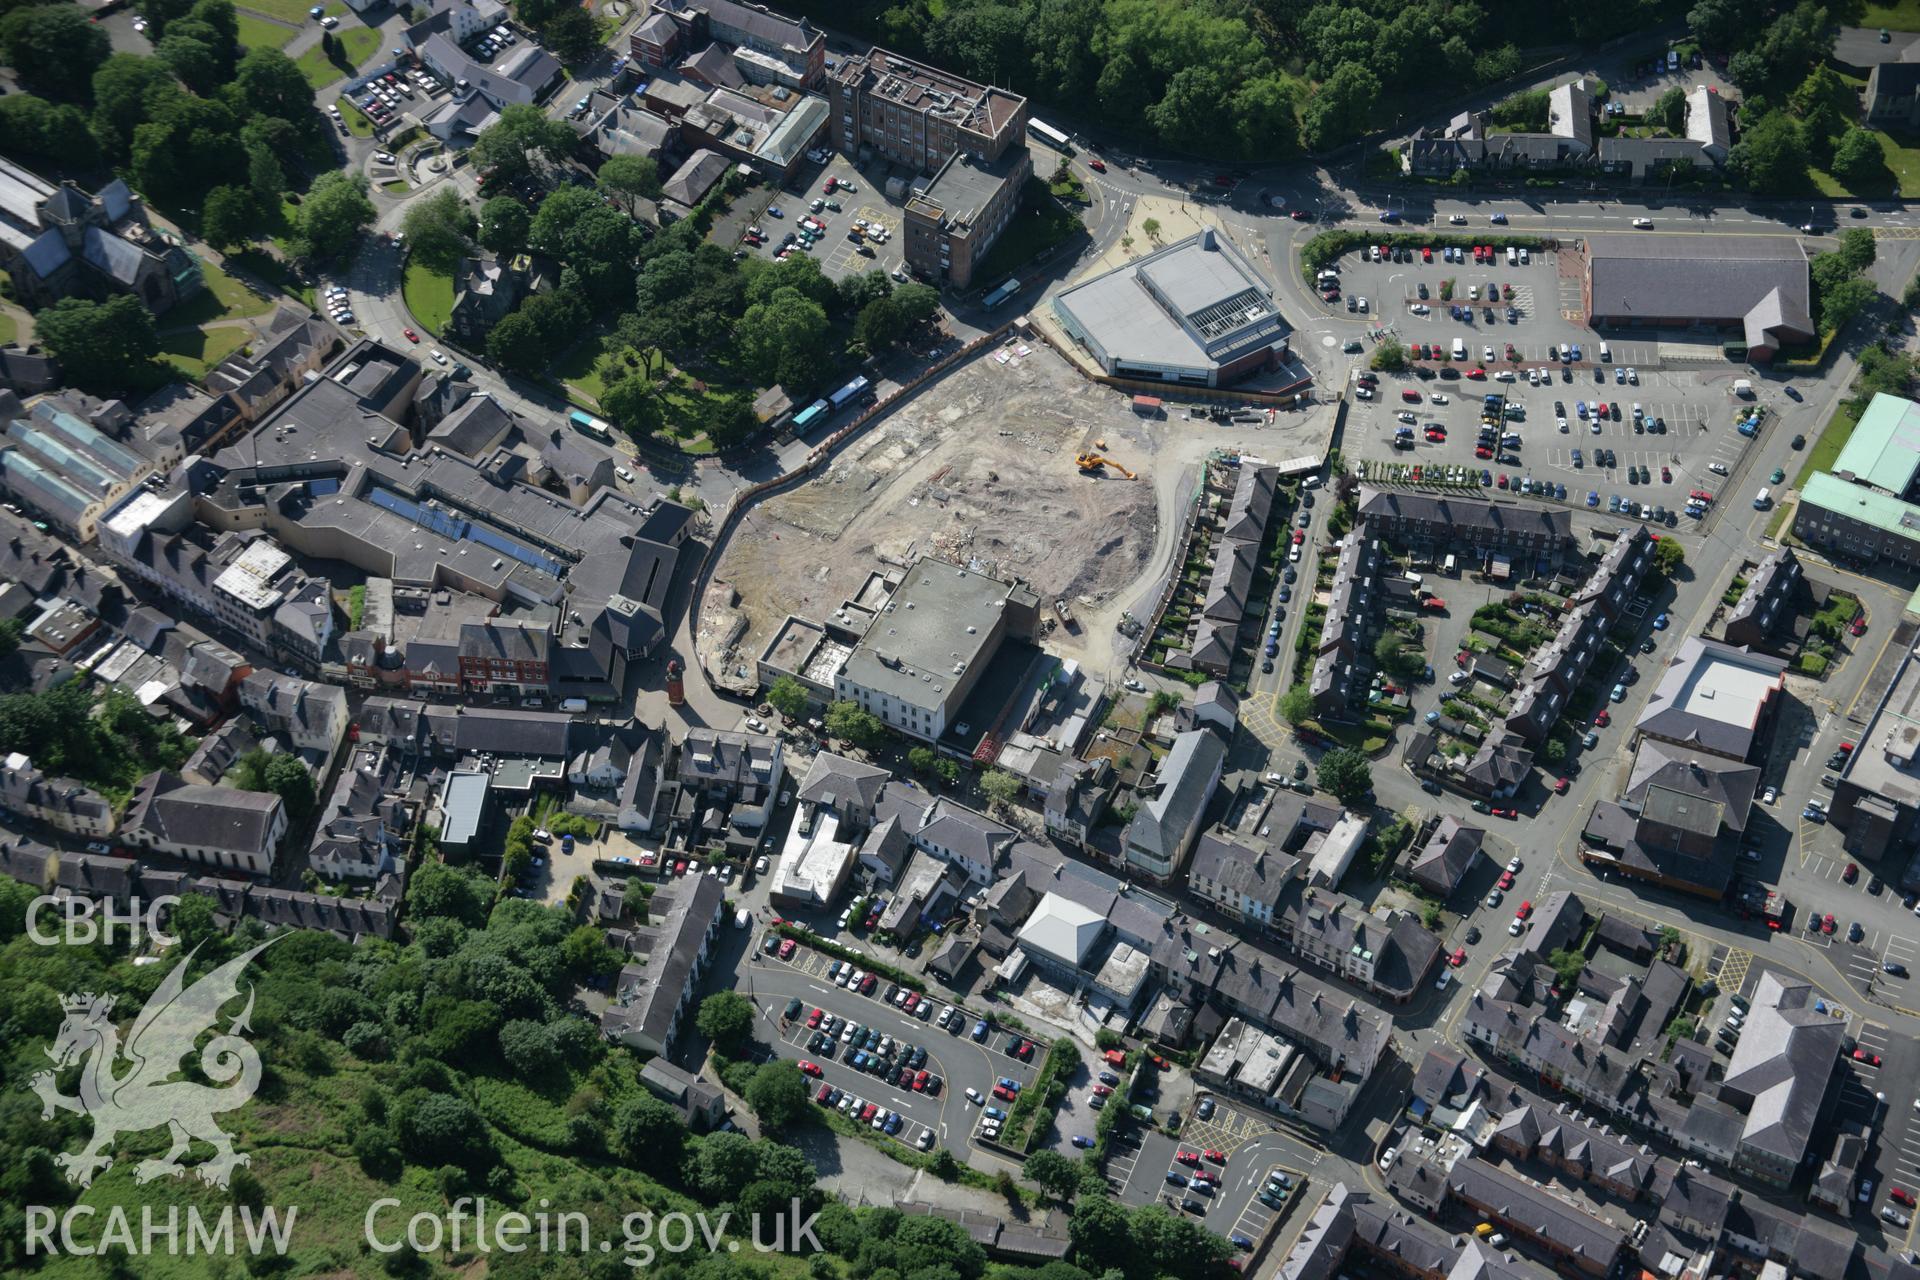 RCAHMW colour oblique aerial photograph of Bangor from the south-east. Taken on 14 June 2006 by Toby Driver.